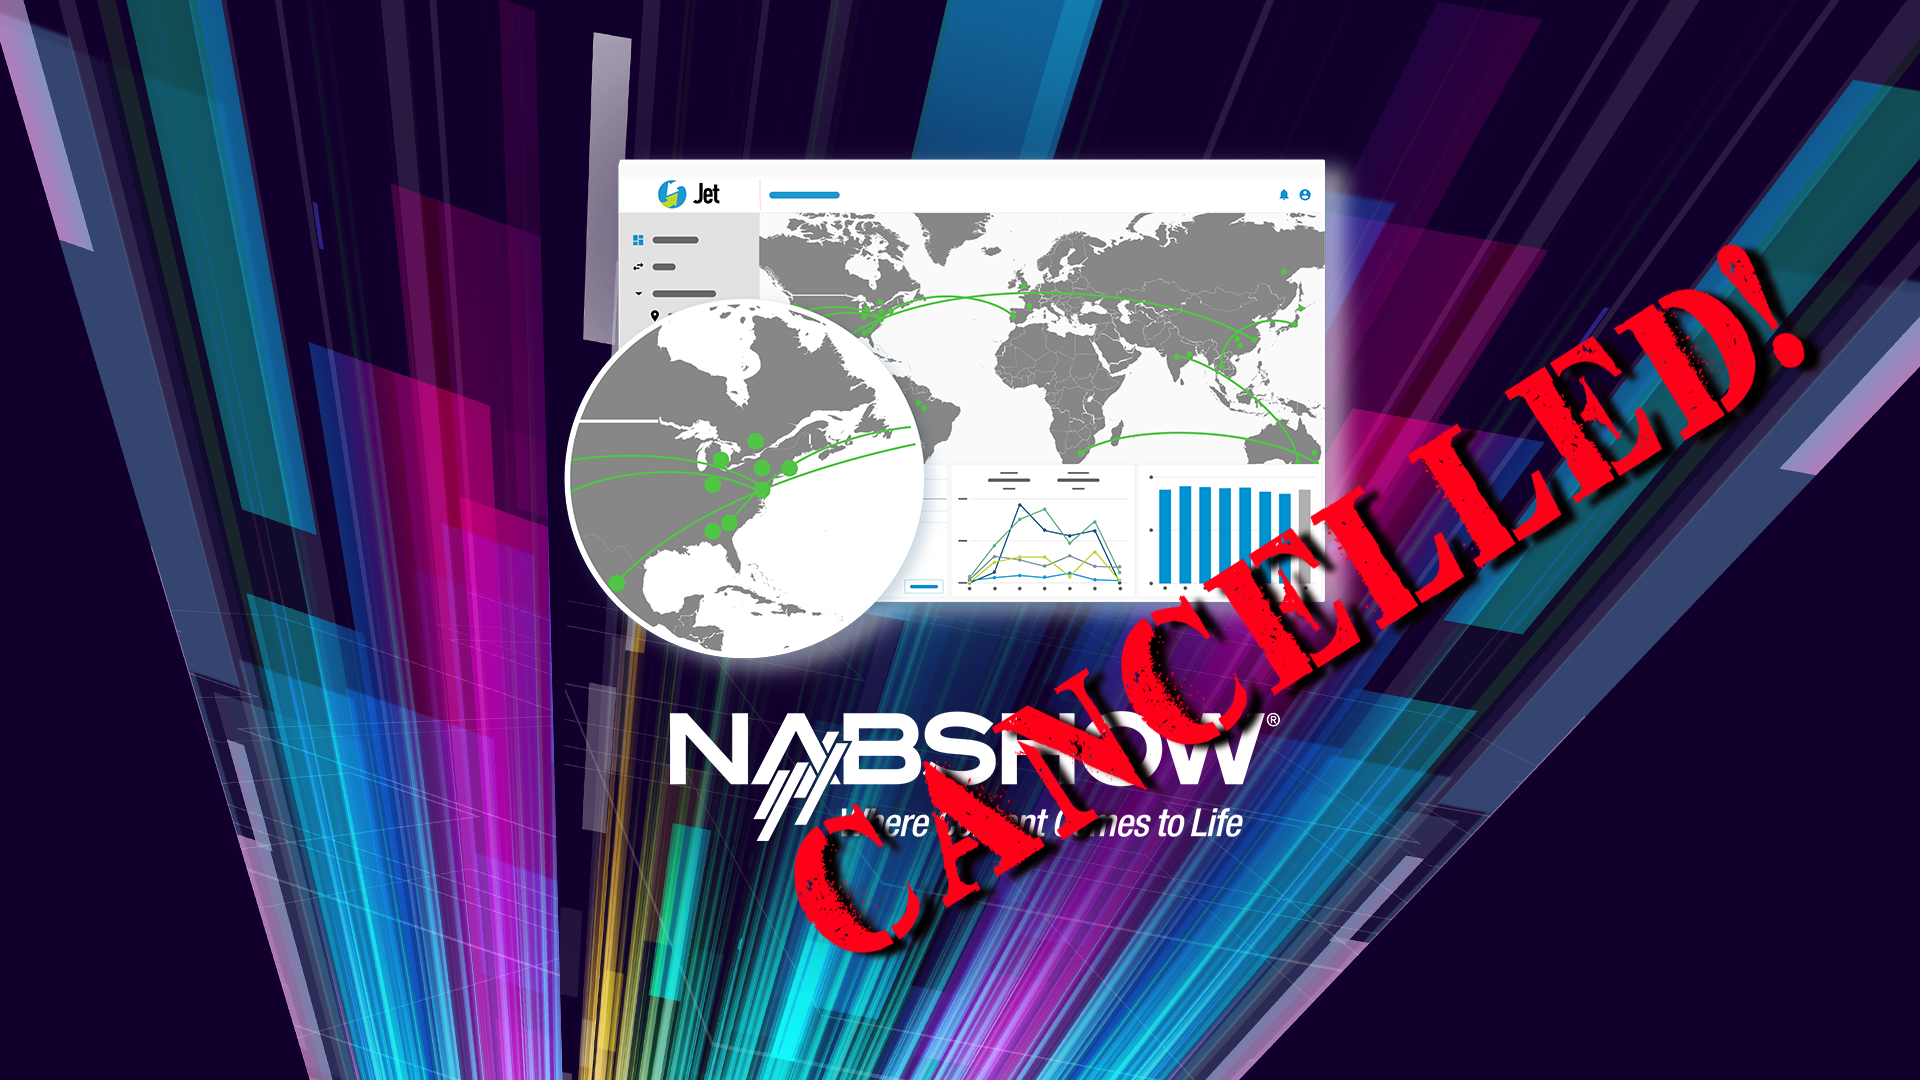 cancelled event image